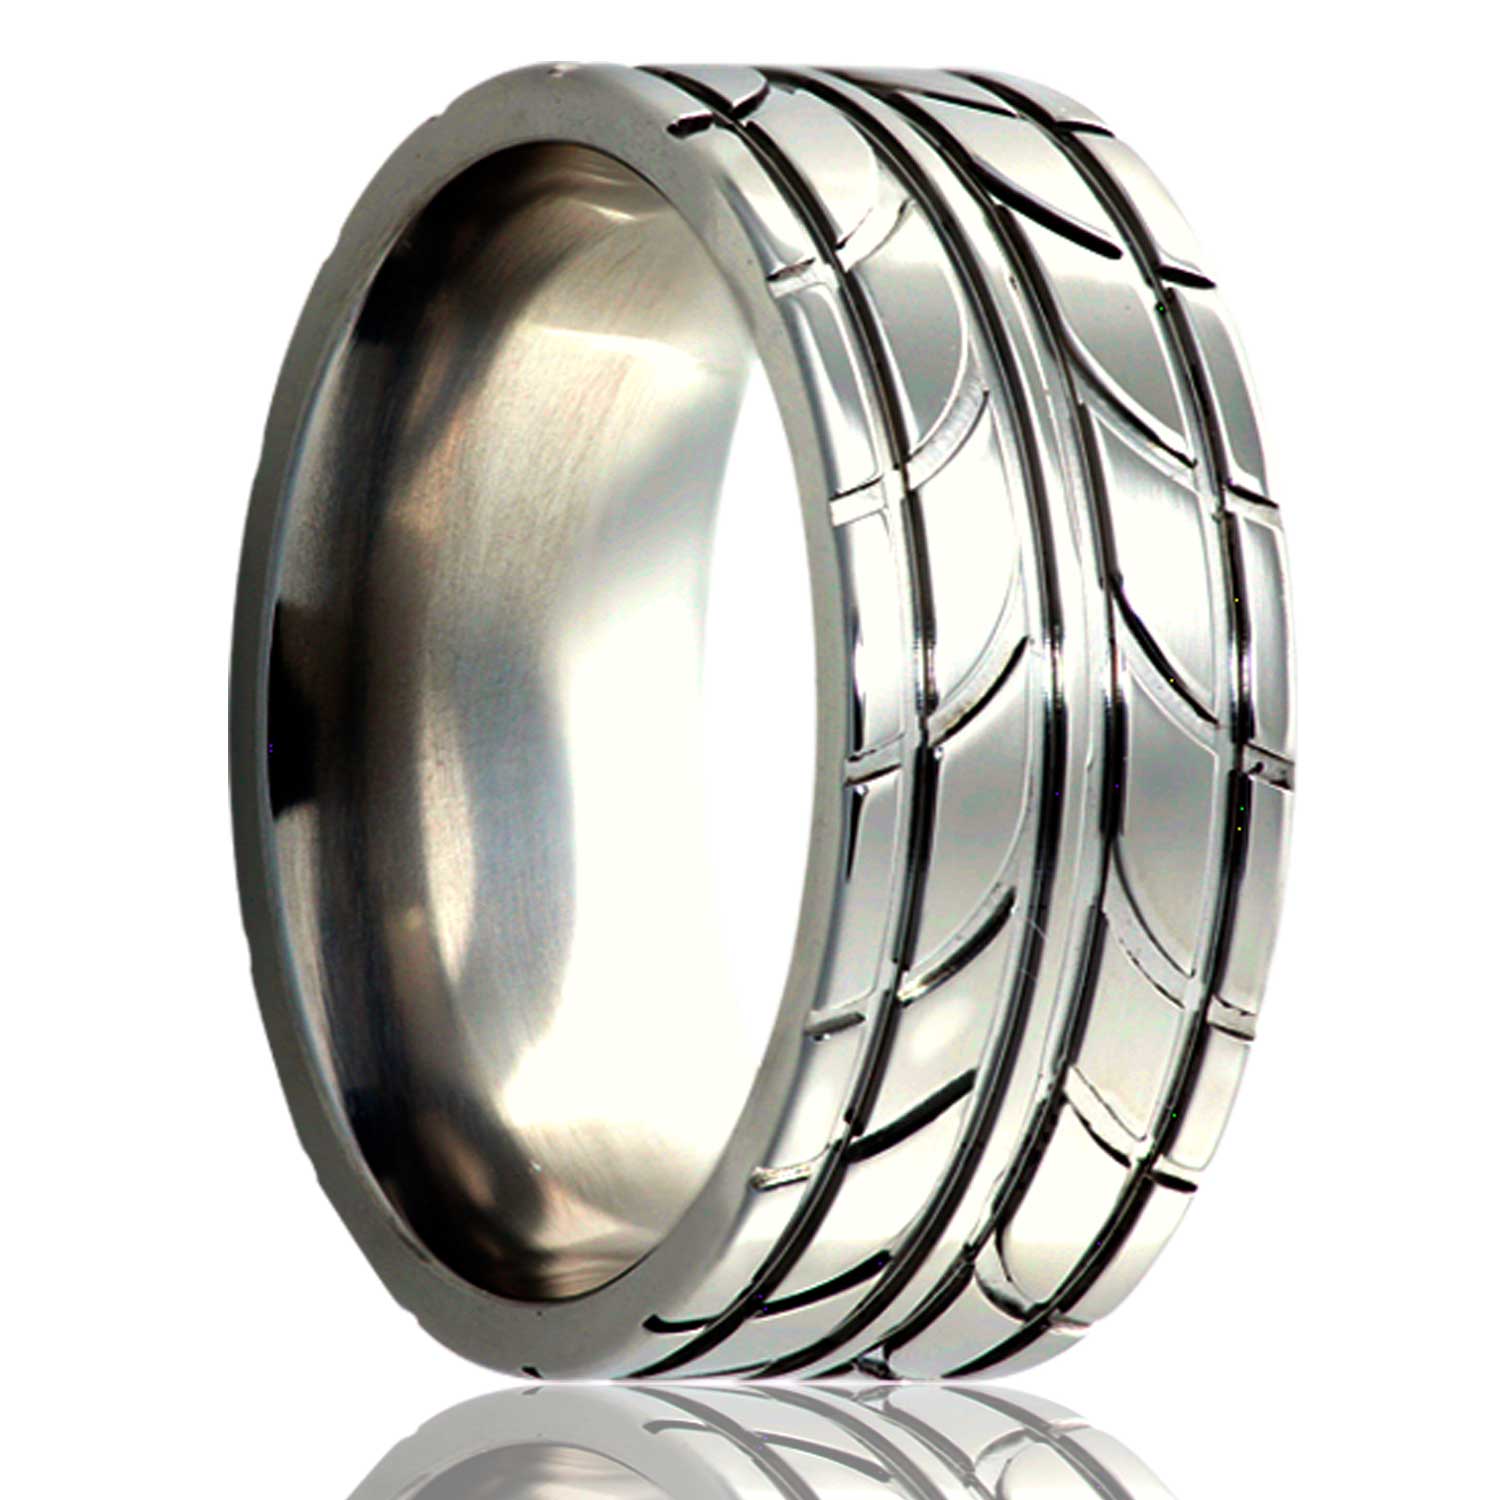 A tire treads cobalt men's wedding band displayed on a neutral white background.